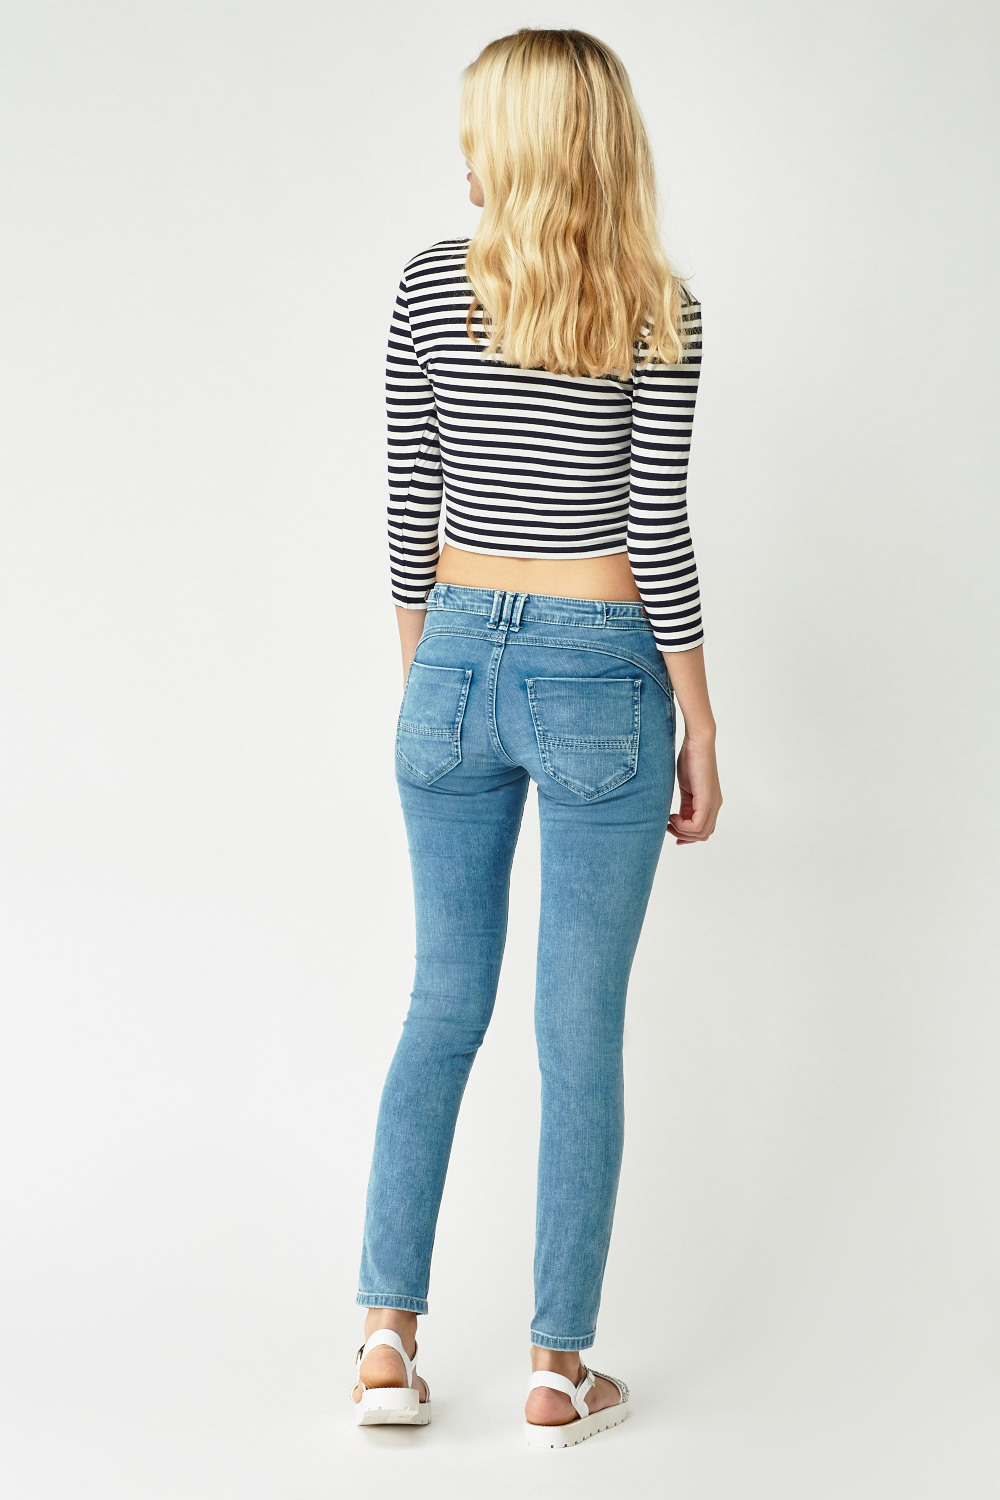 Washed Out Denim Blue Skinny Jeans - Just $7